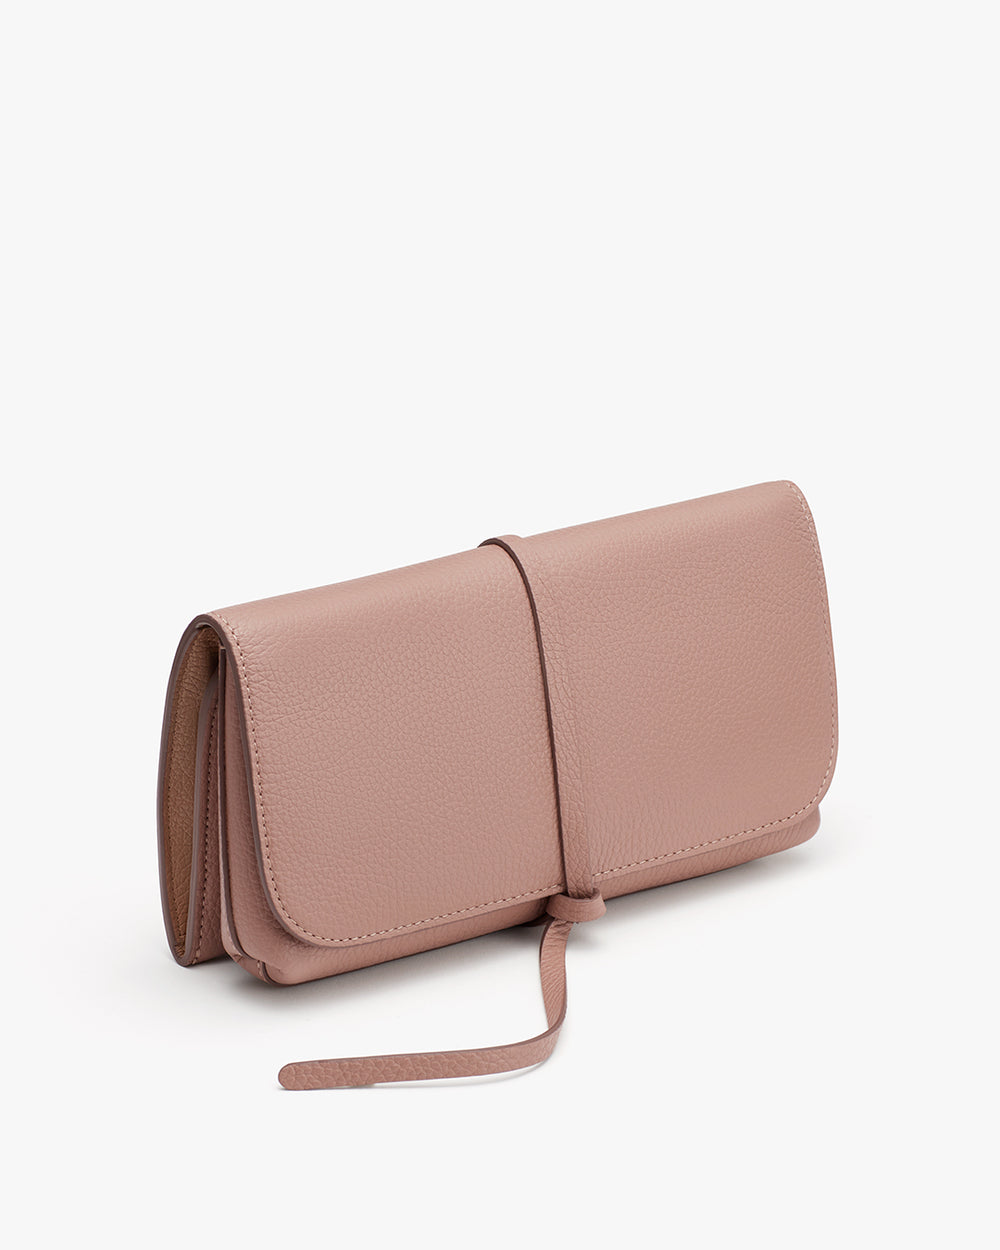 Small handbag with a strap on a plain background.